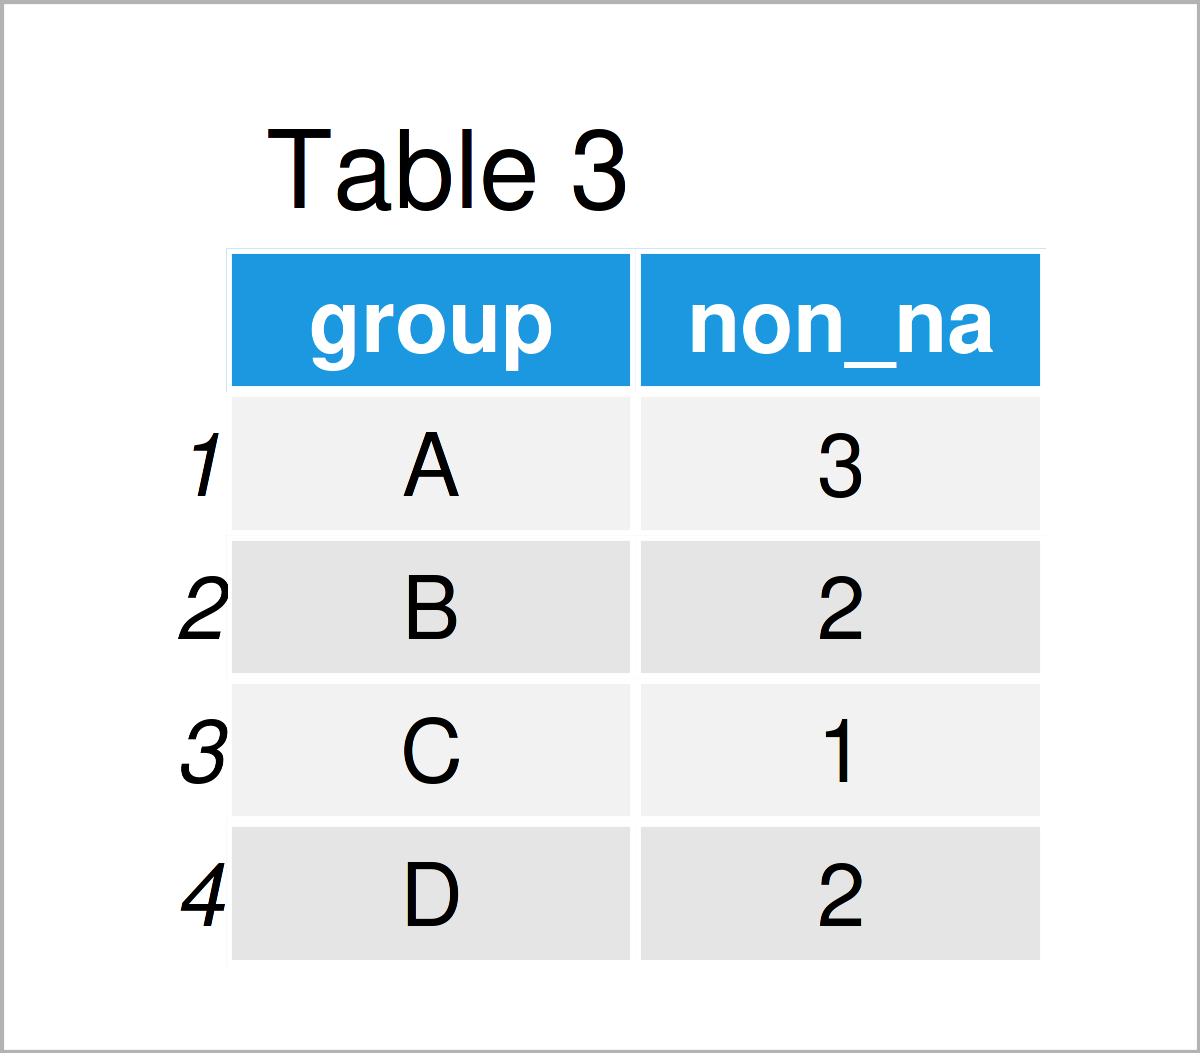 table 3 tbl_df count non na values group